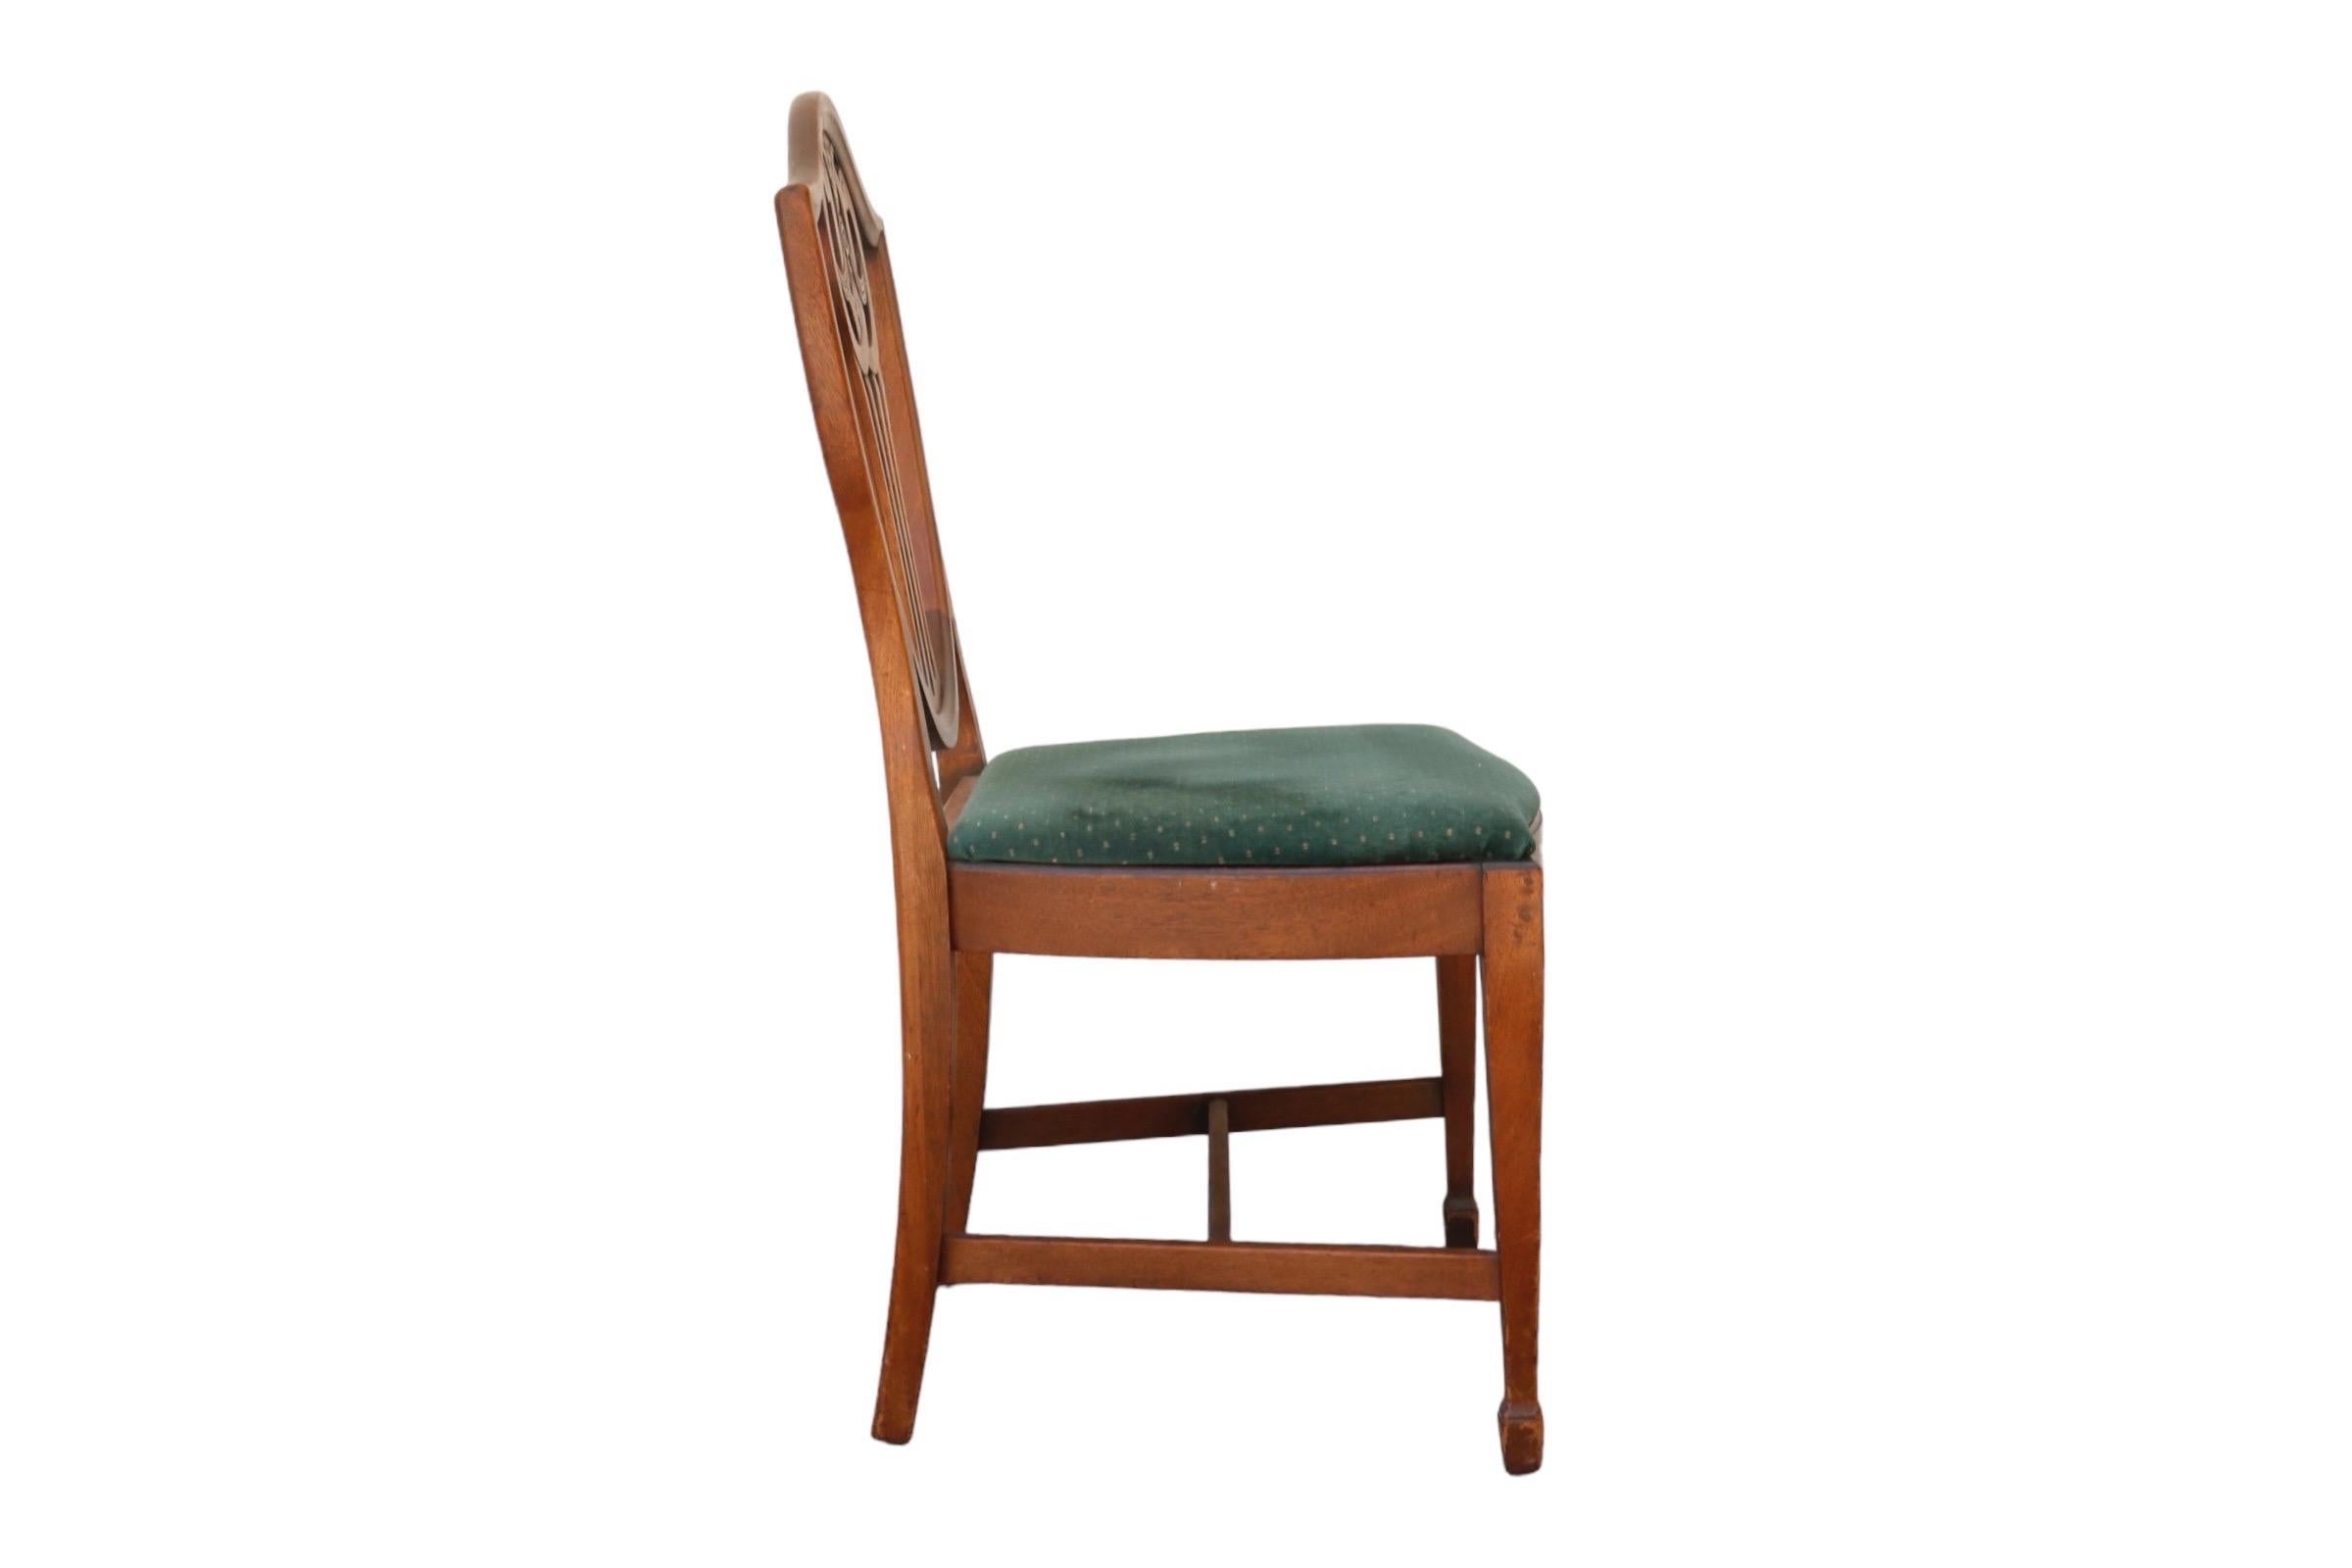 American 1937 Macys Shield Back Dining Chairs - Set of 6 For Sale